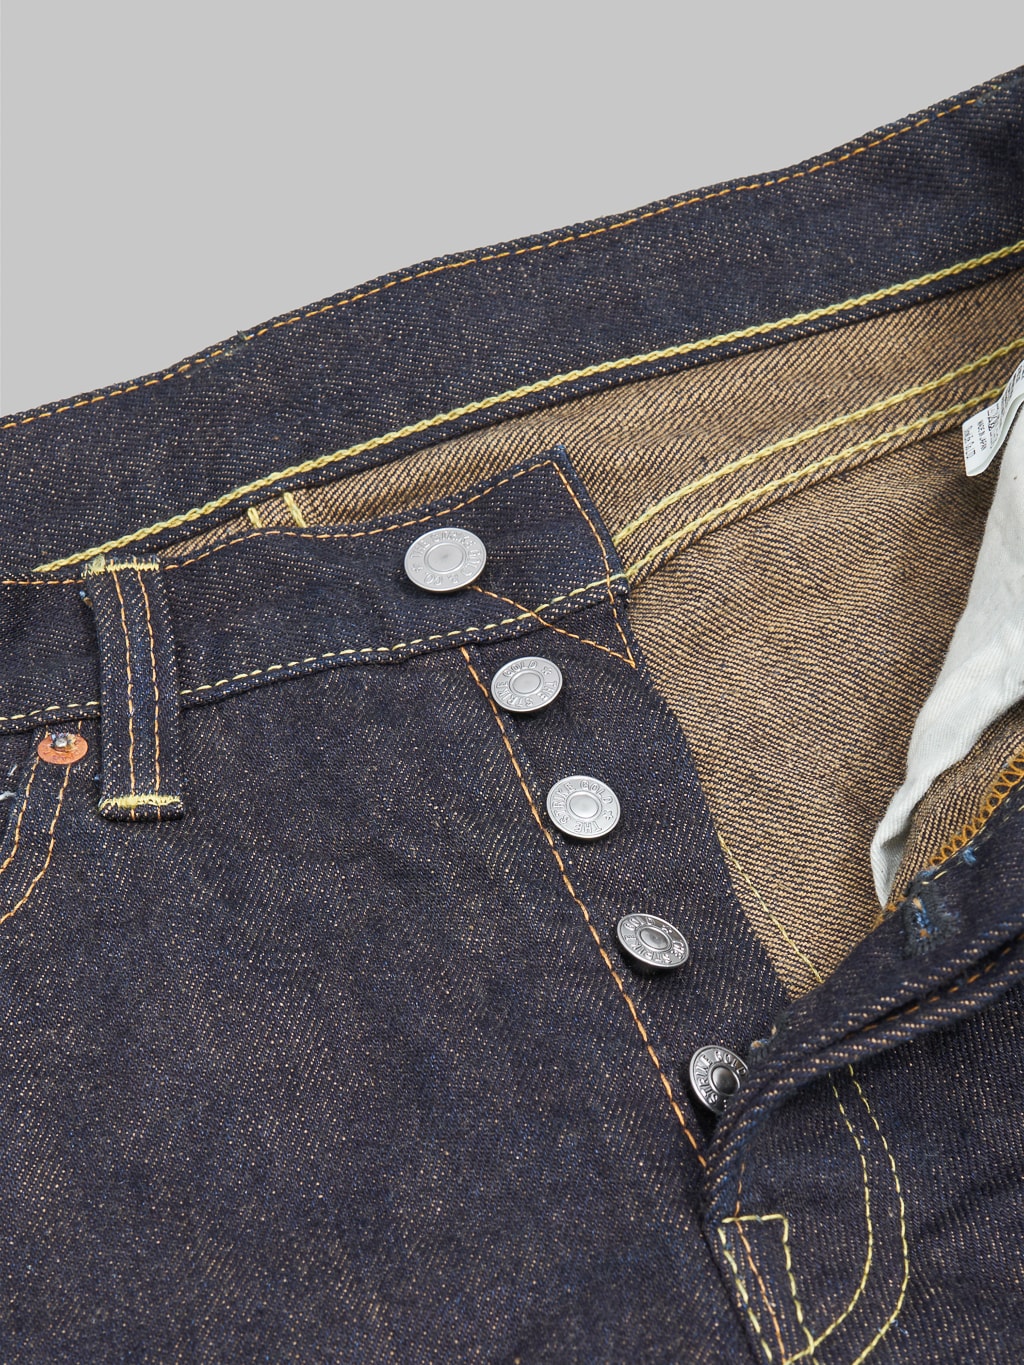 The Strike Gold Brown Weft Slim Tapered Jeans iron buttons